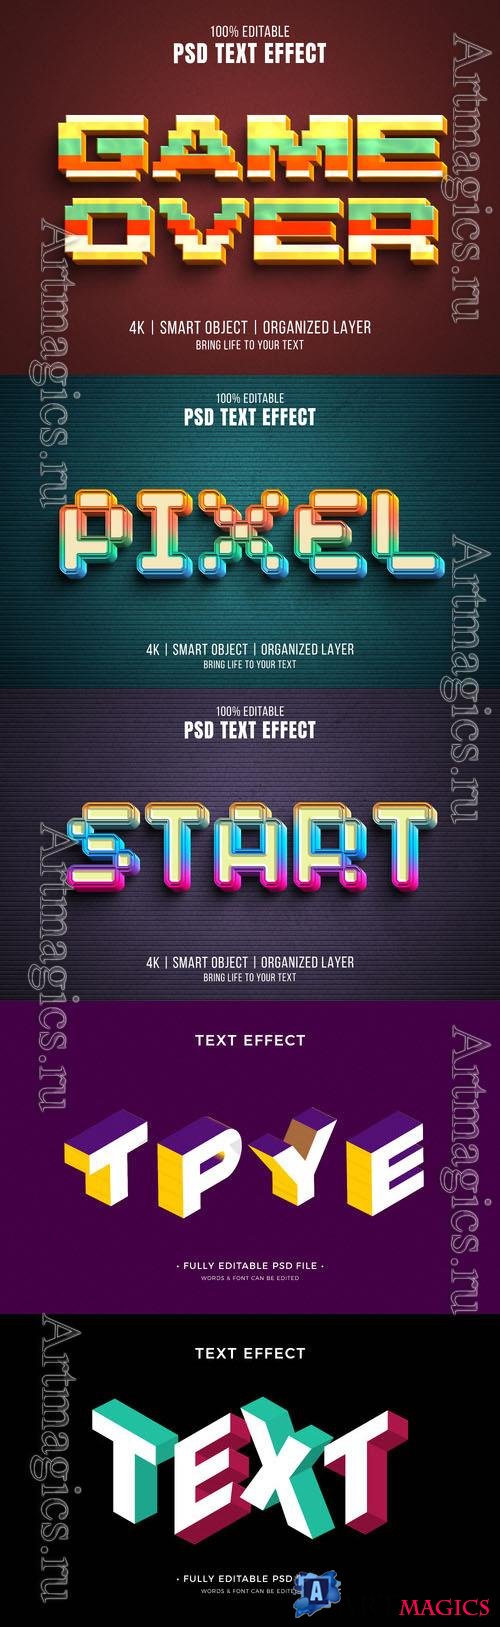 Psd style text effect editable design
 collection vol 264